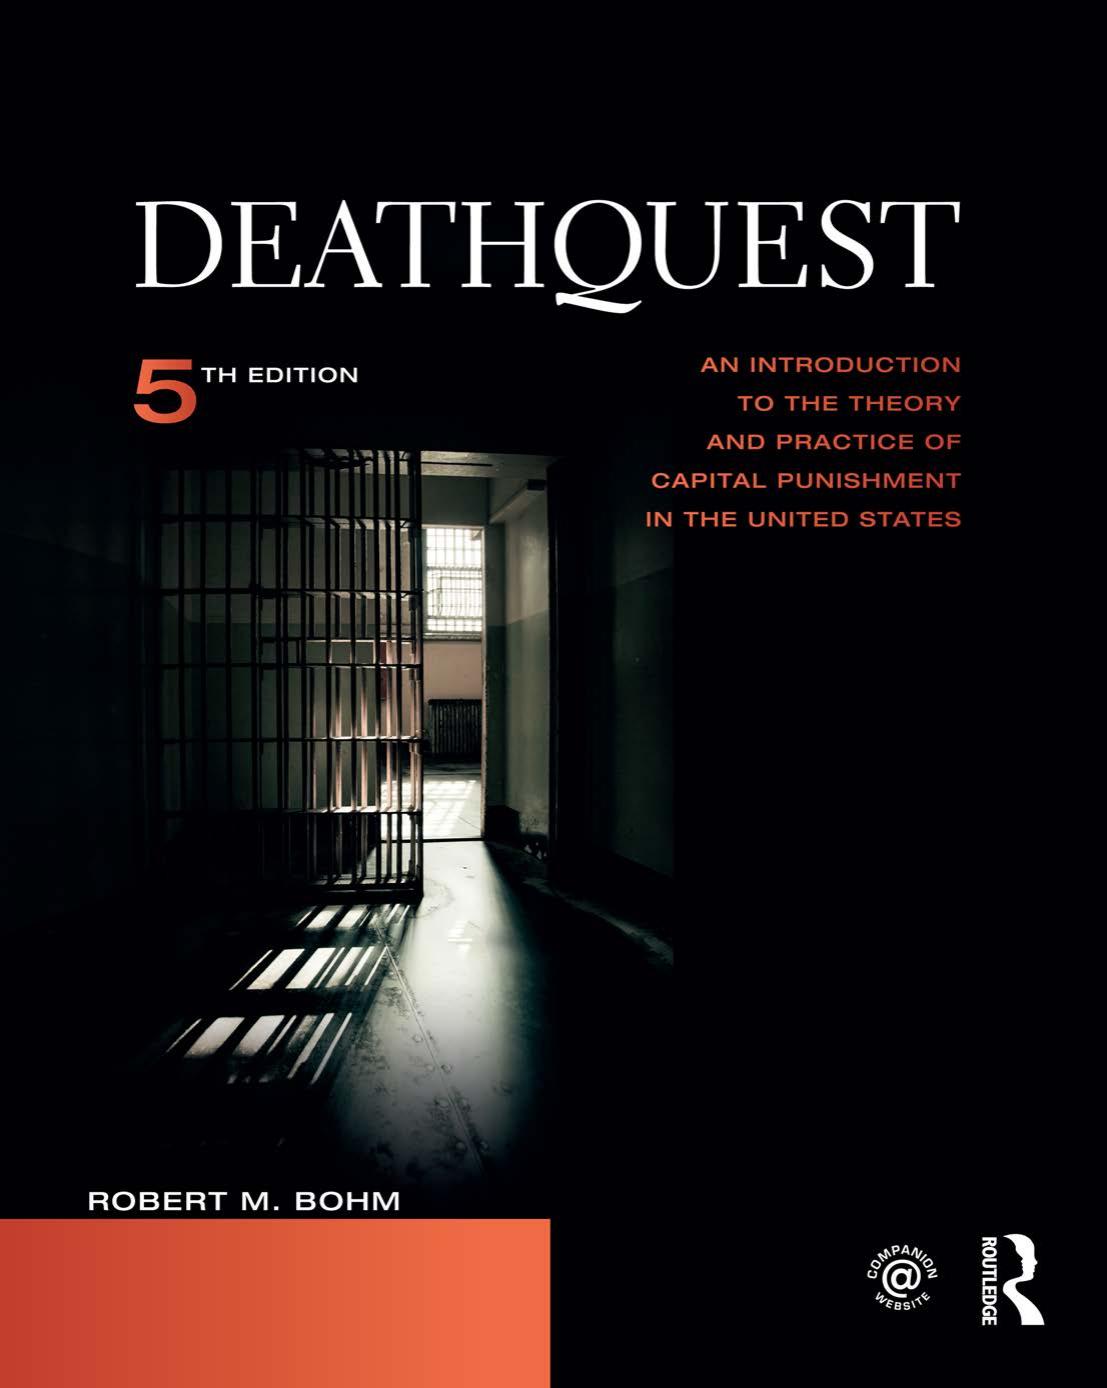 DeathQuest An Introduction to the Theory and Practice of Capital Punishment 5e.jpg